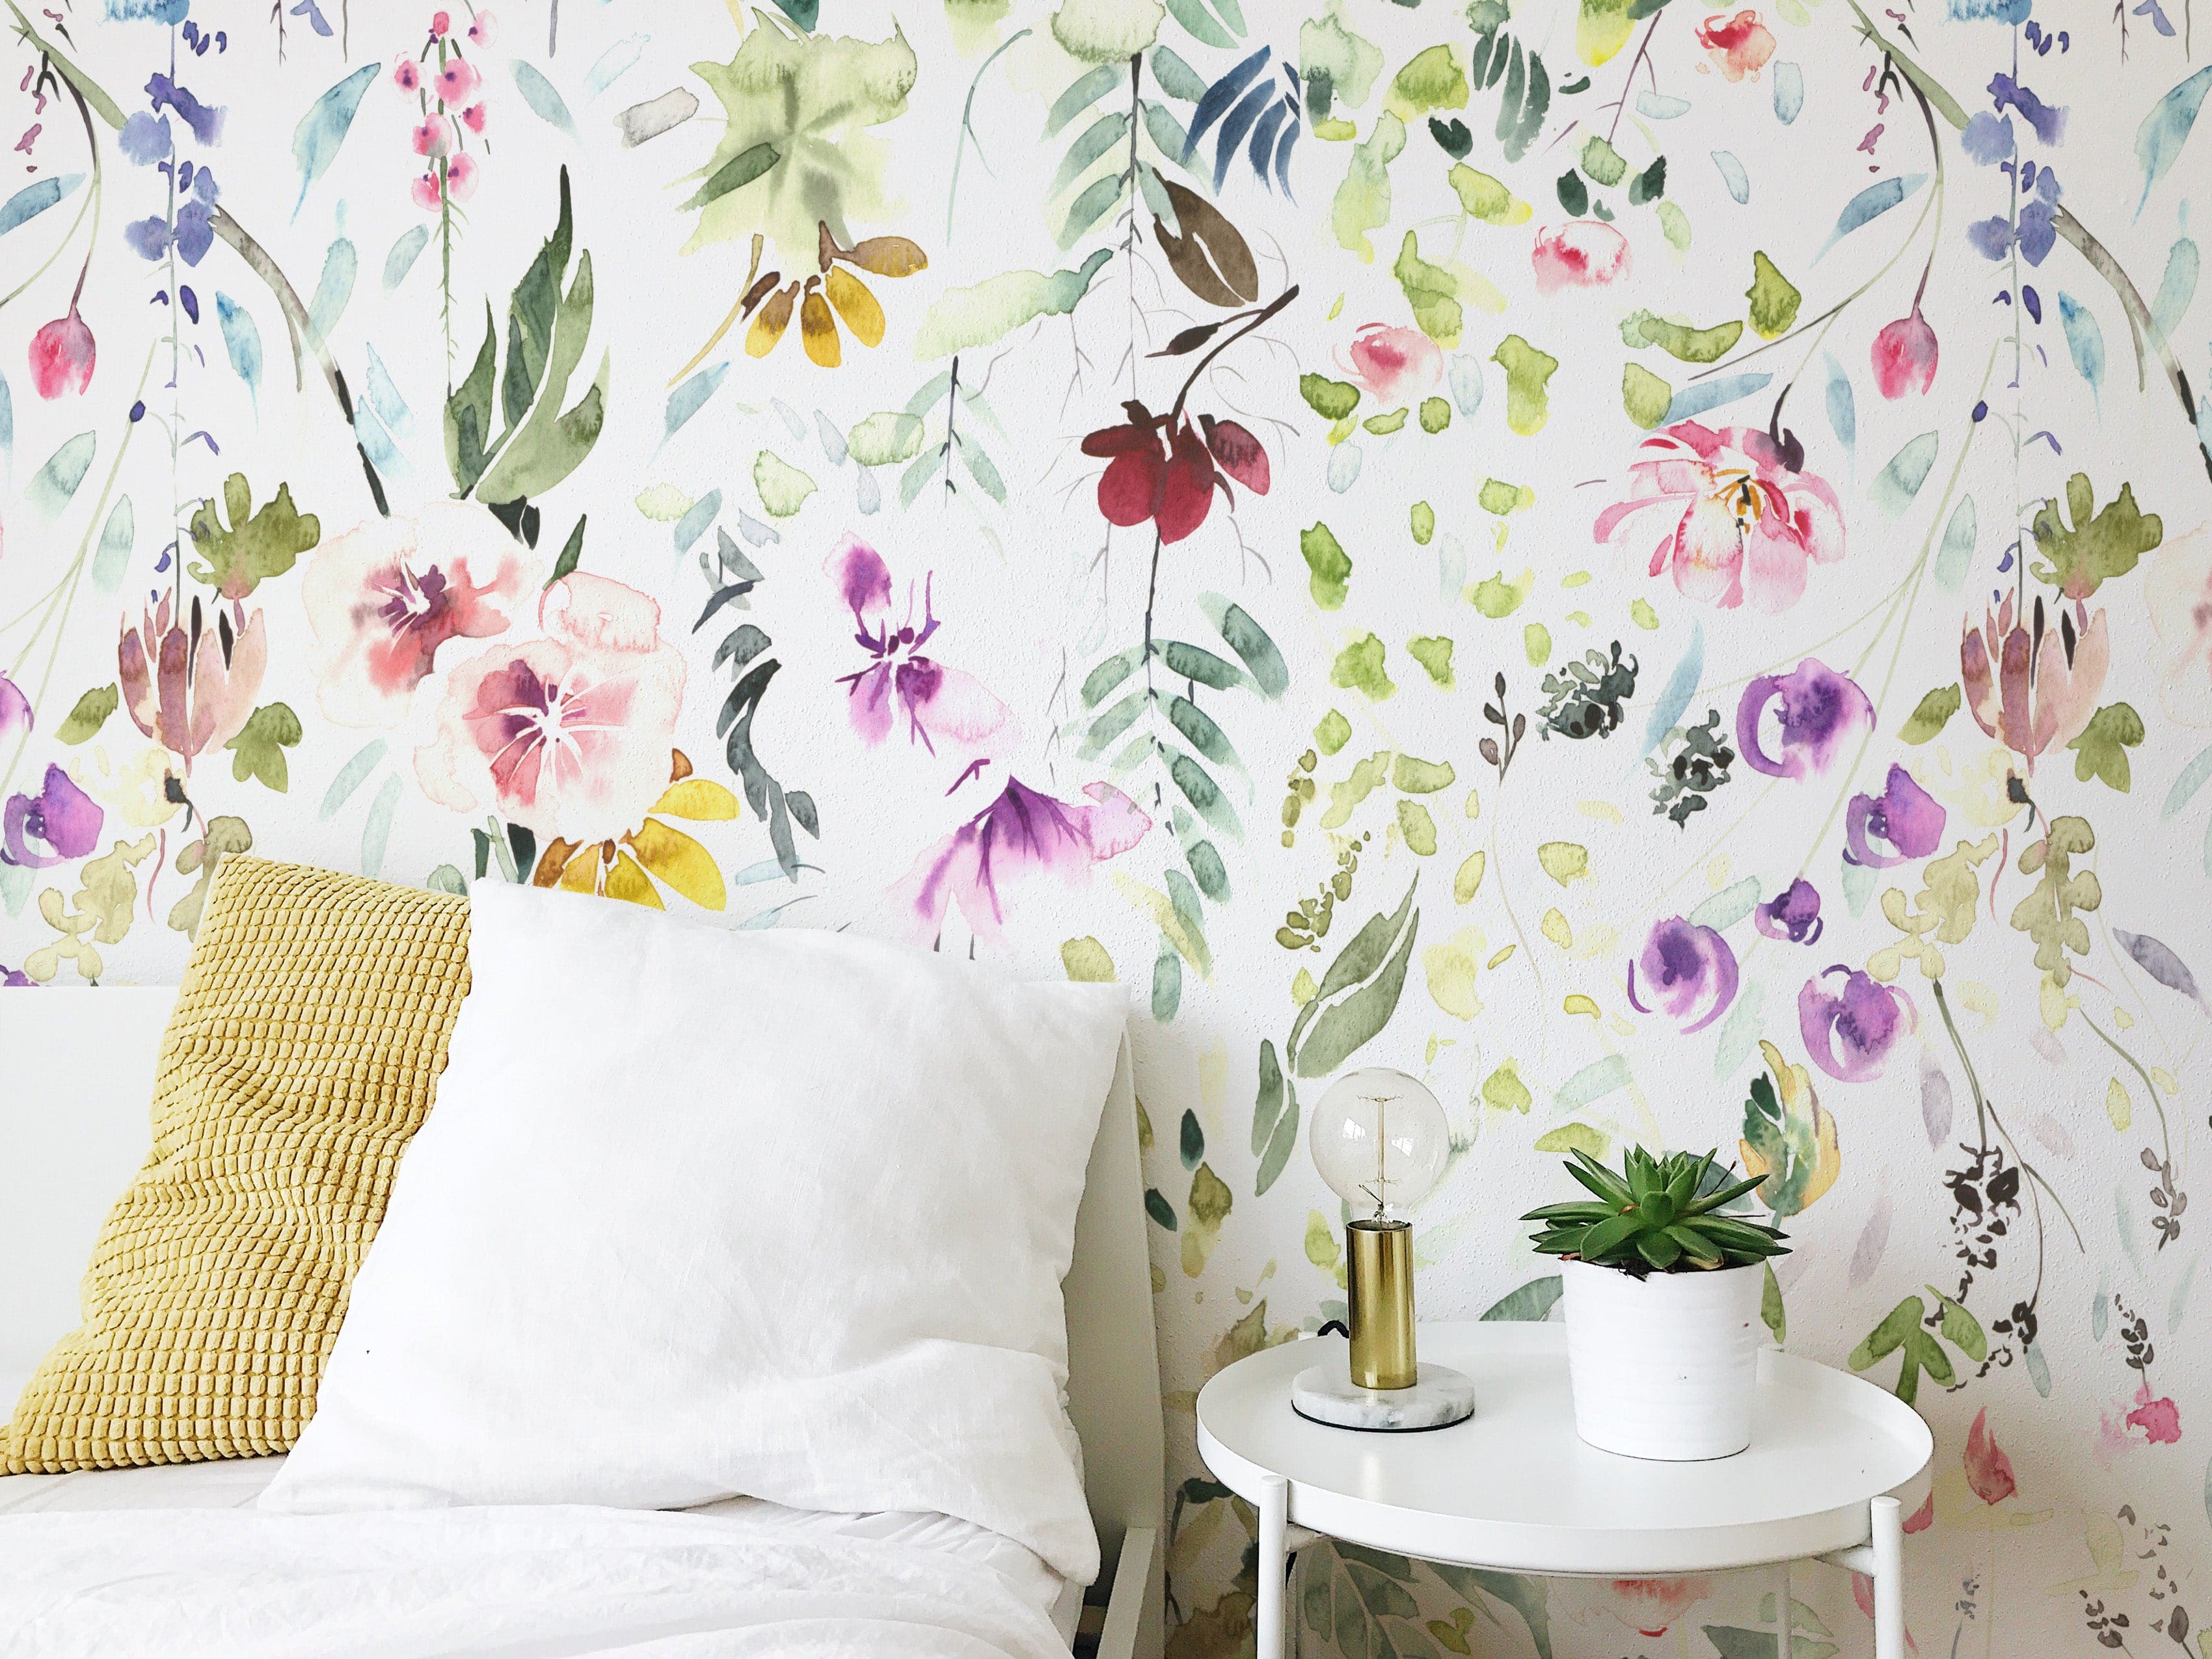 A charming bedroom setting showcasing Hera's Floral Wallpaper, with a vibrant and colorful watercolor floral pattern. The wallpaper provides a lively backdrop to a simple white bed with beige pillows, complemented by a small white side table with a green potted plant and a unique lamp.